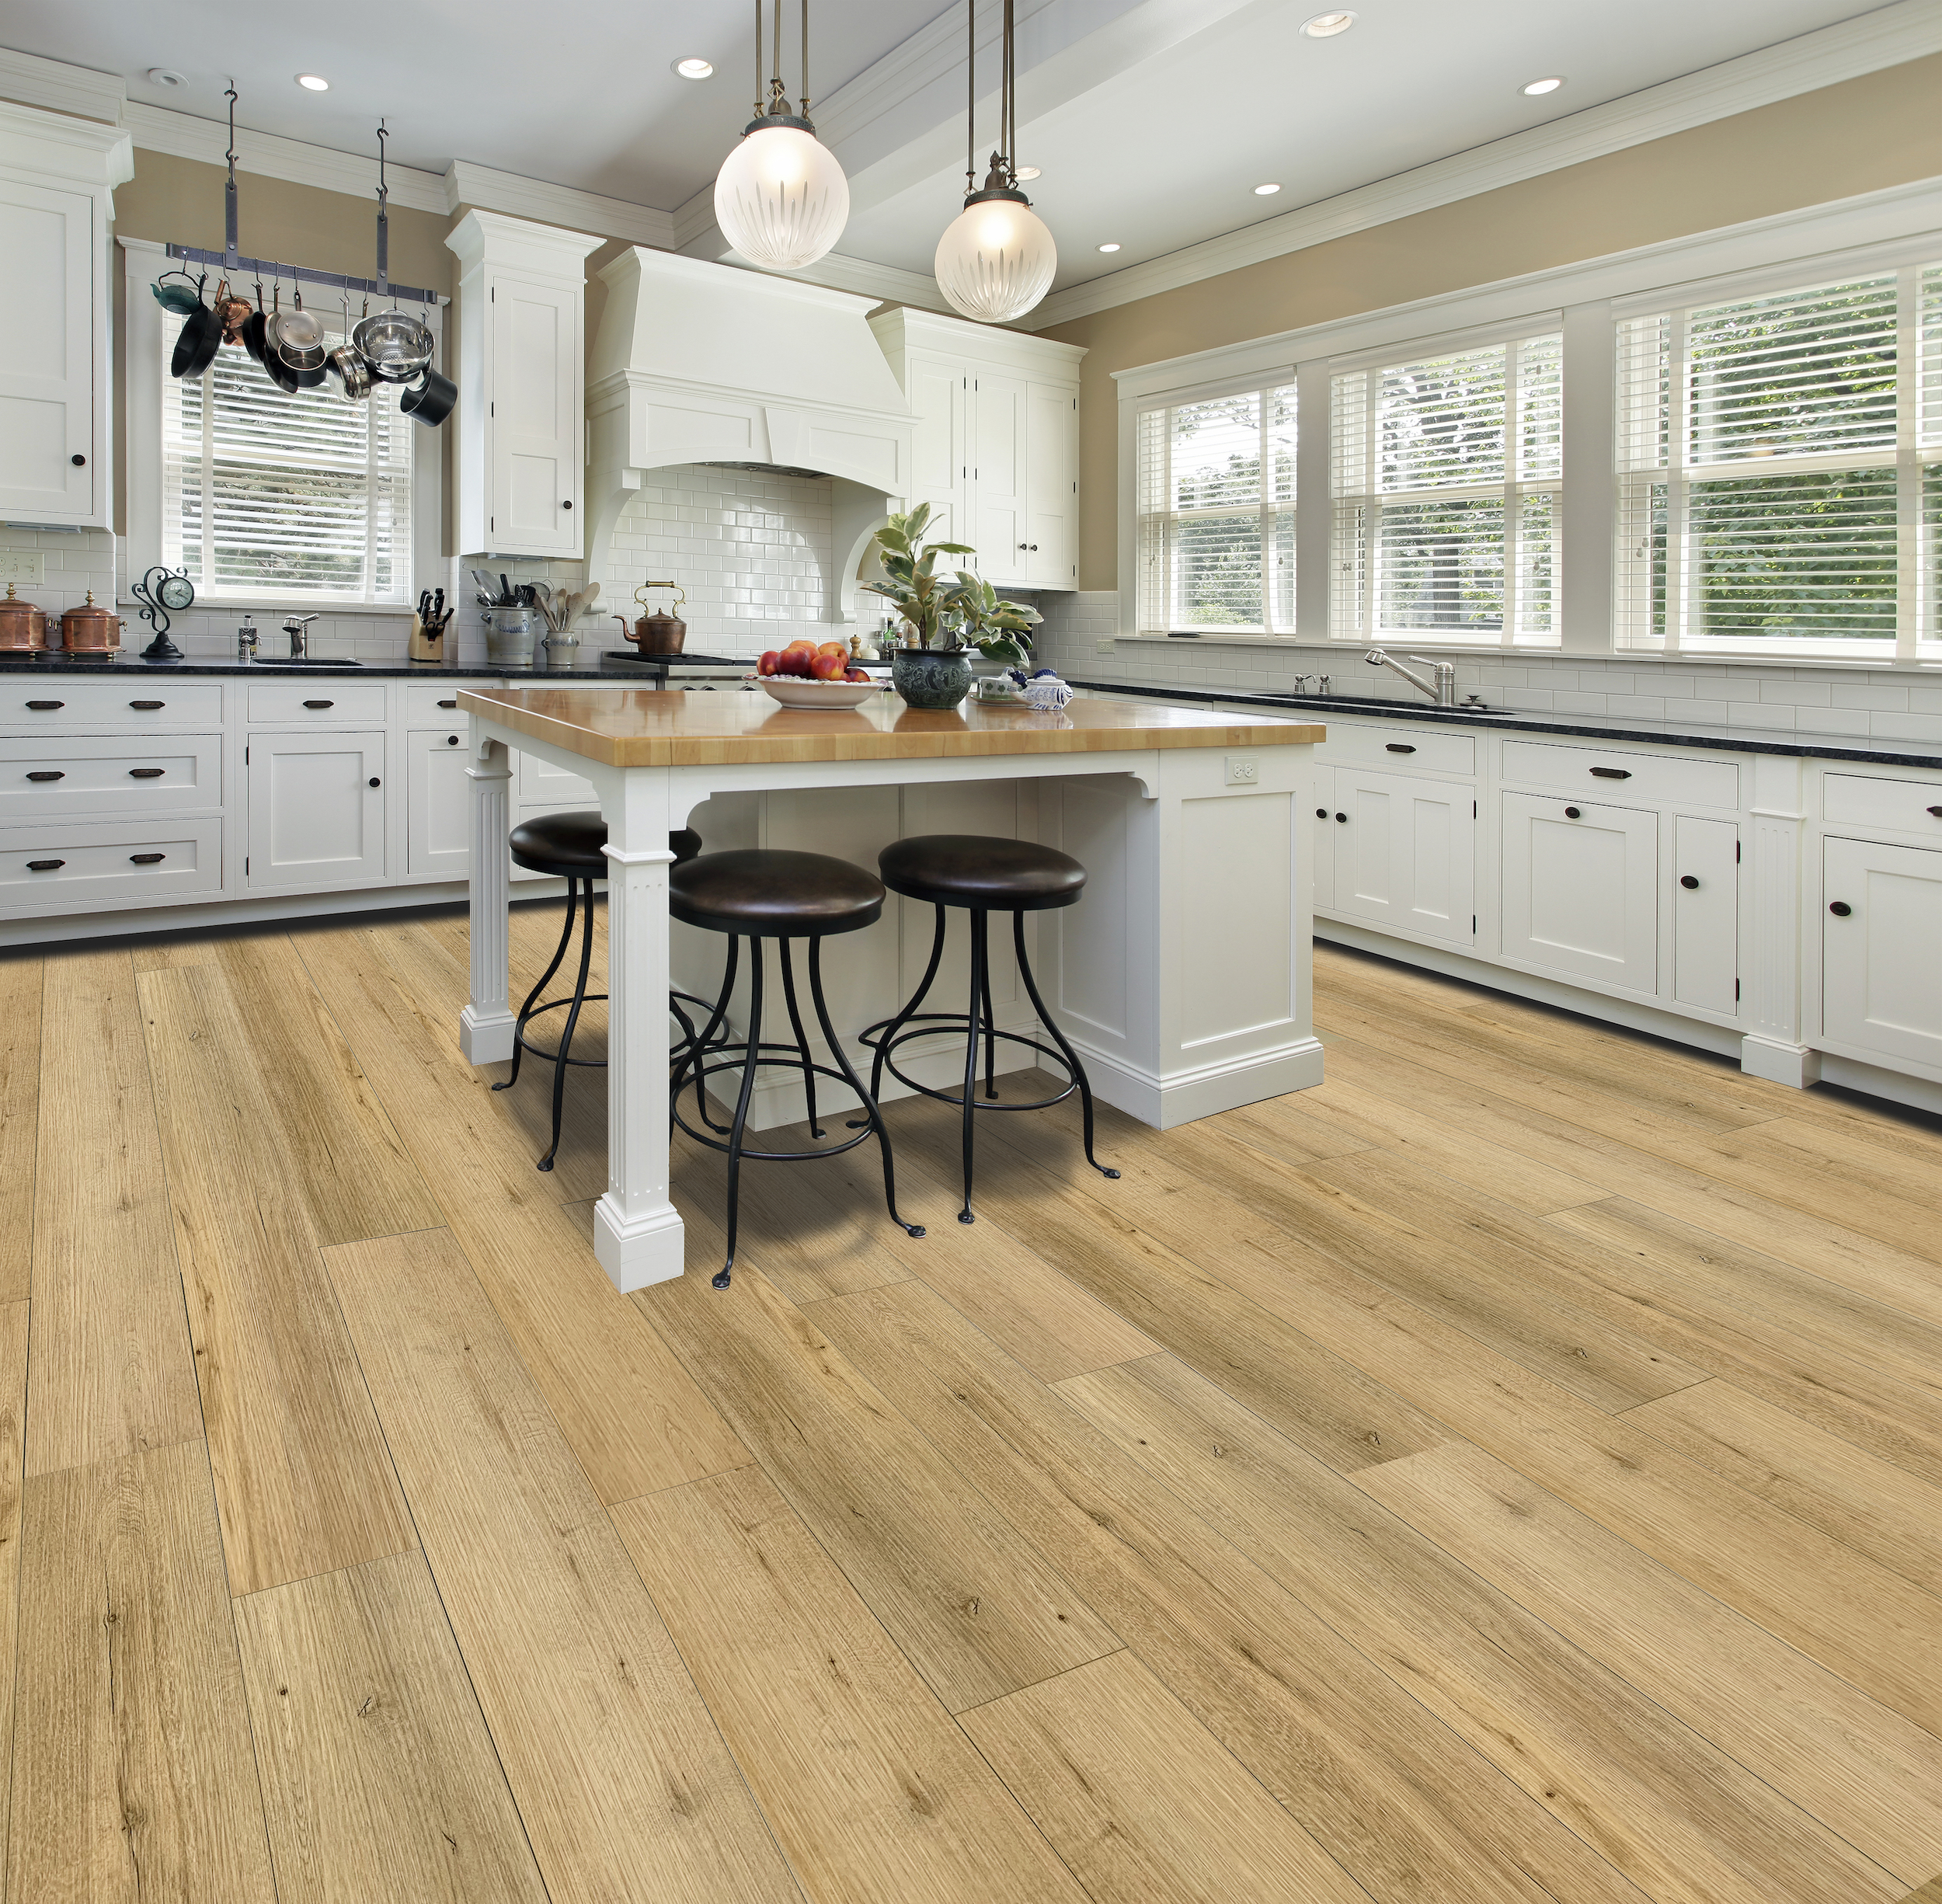 Could This Flooring Be the Perfect Choice for Your Home. Weighing the Pros and Cons of Marine Vinyl Flooring From Amazon